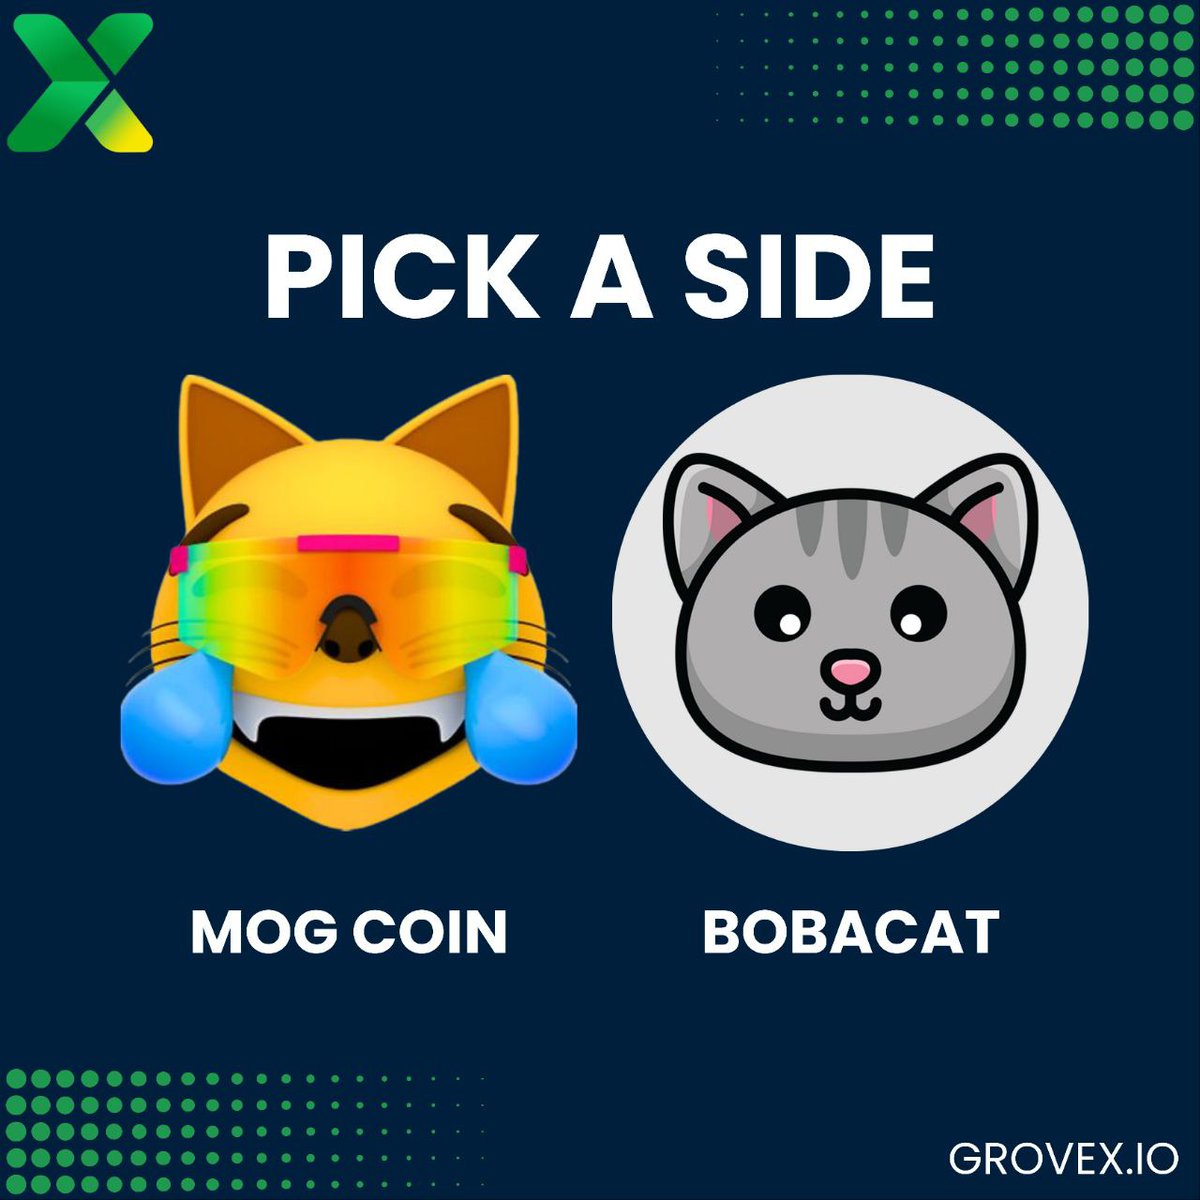 1v1 battle of the #memes❗️ Which side you picking, #Mog or #PSPS ❓️ #Crypto #Bitcoin #Mog #PSPS